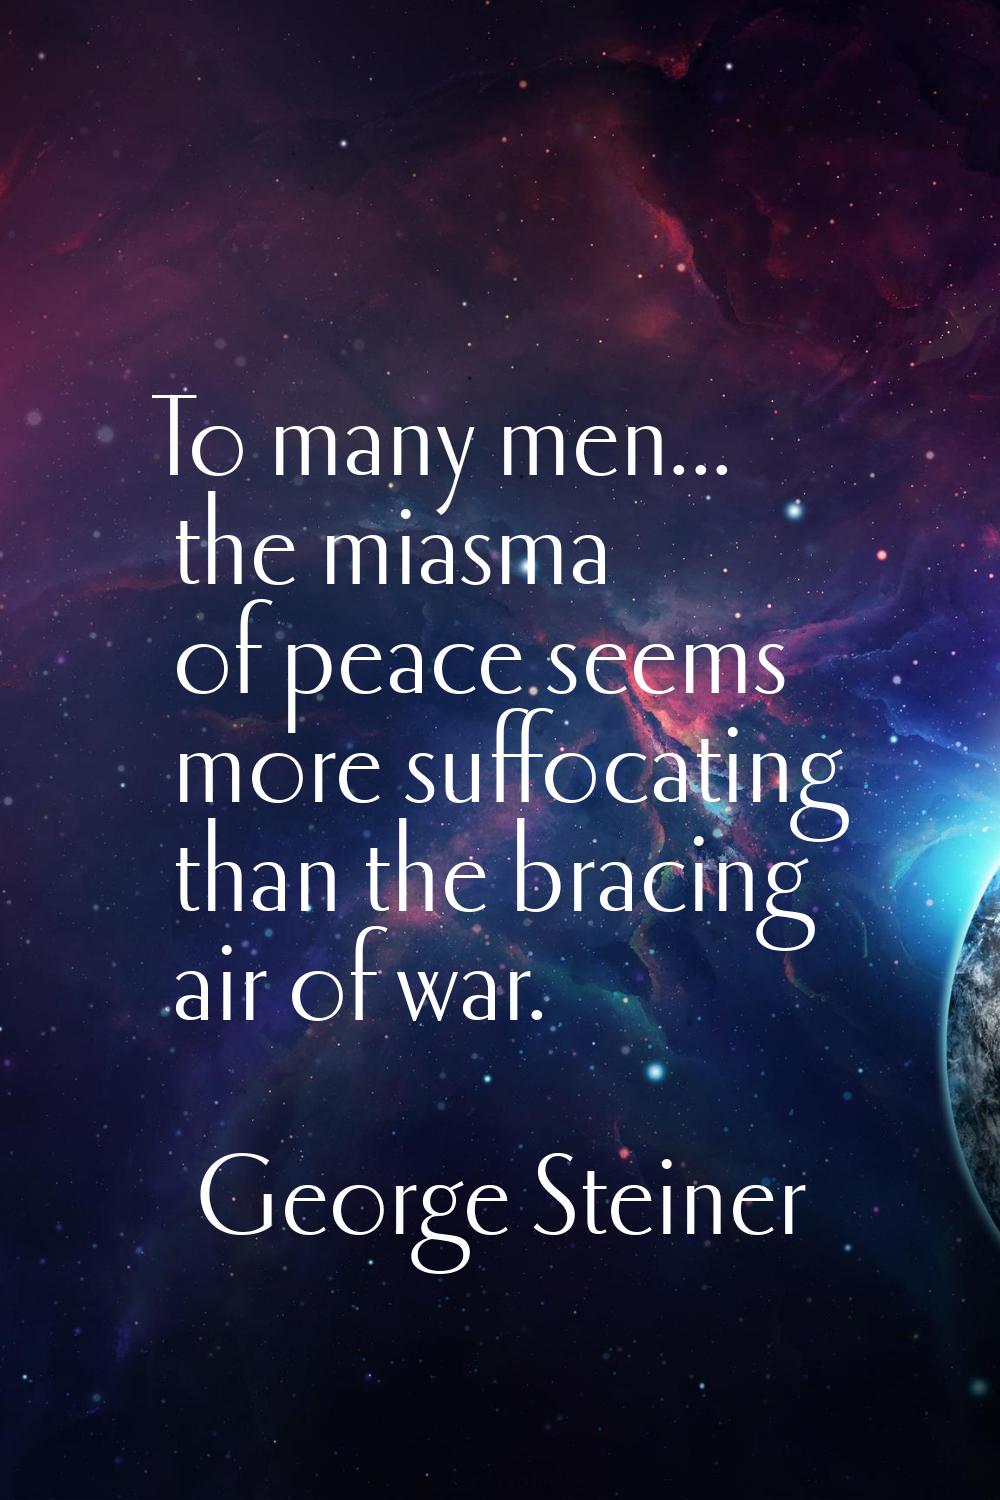 To many men... the miasma of peace seems more suffocating than the bracing air of war.